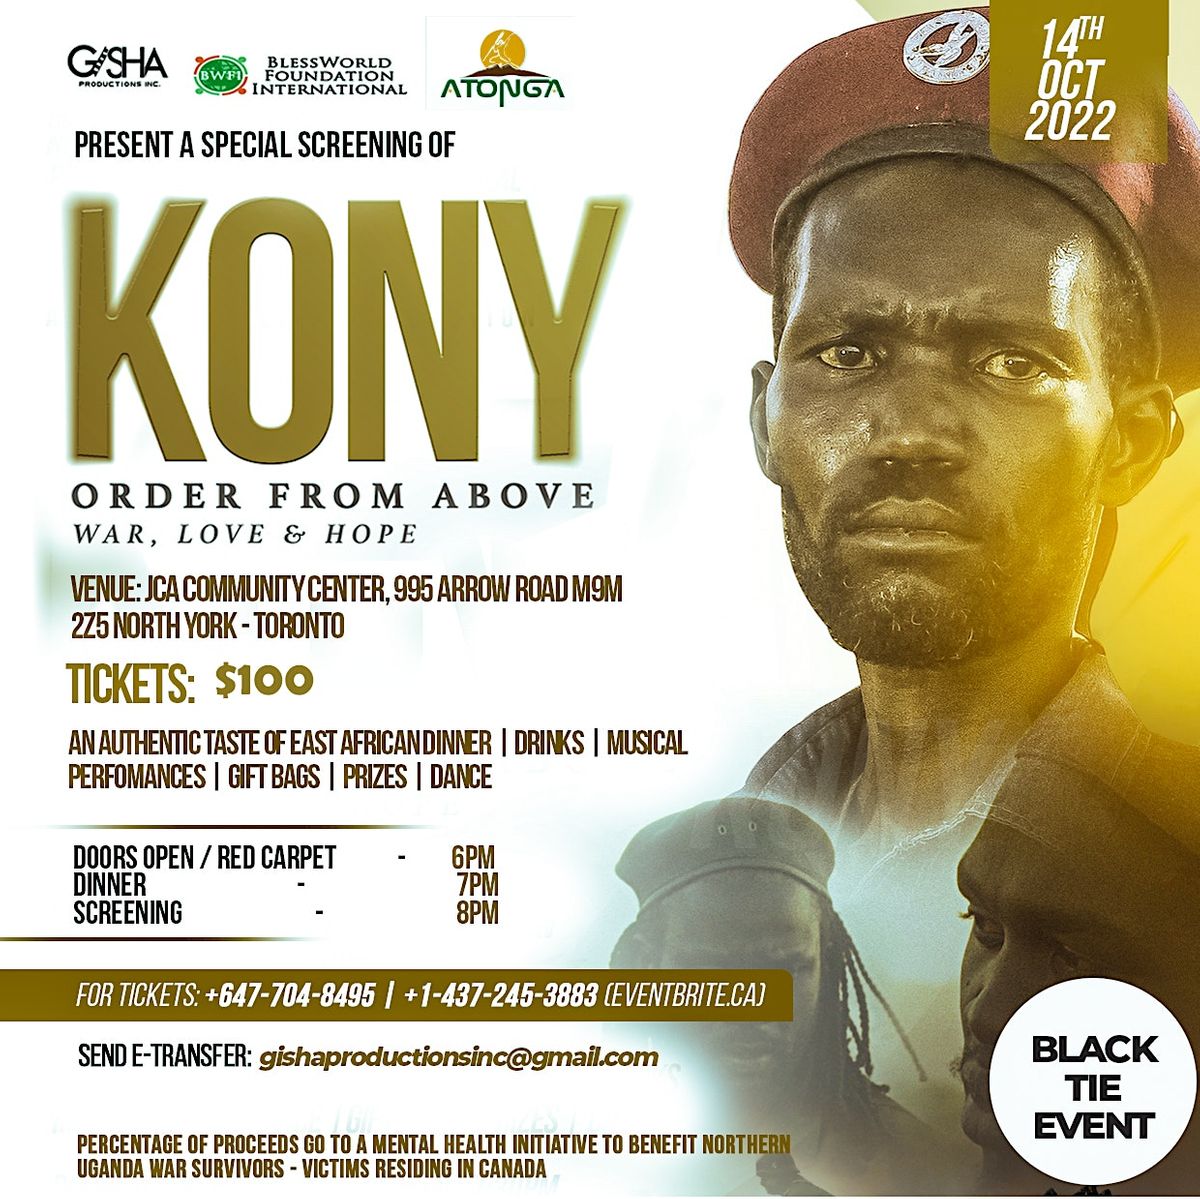 SPECIAL SCREENING - KONY:ORDER FROM ABOVE